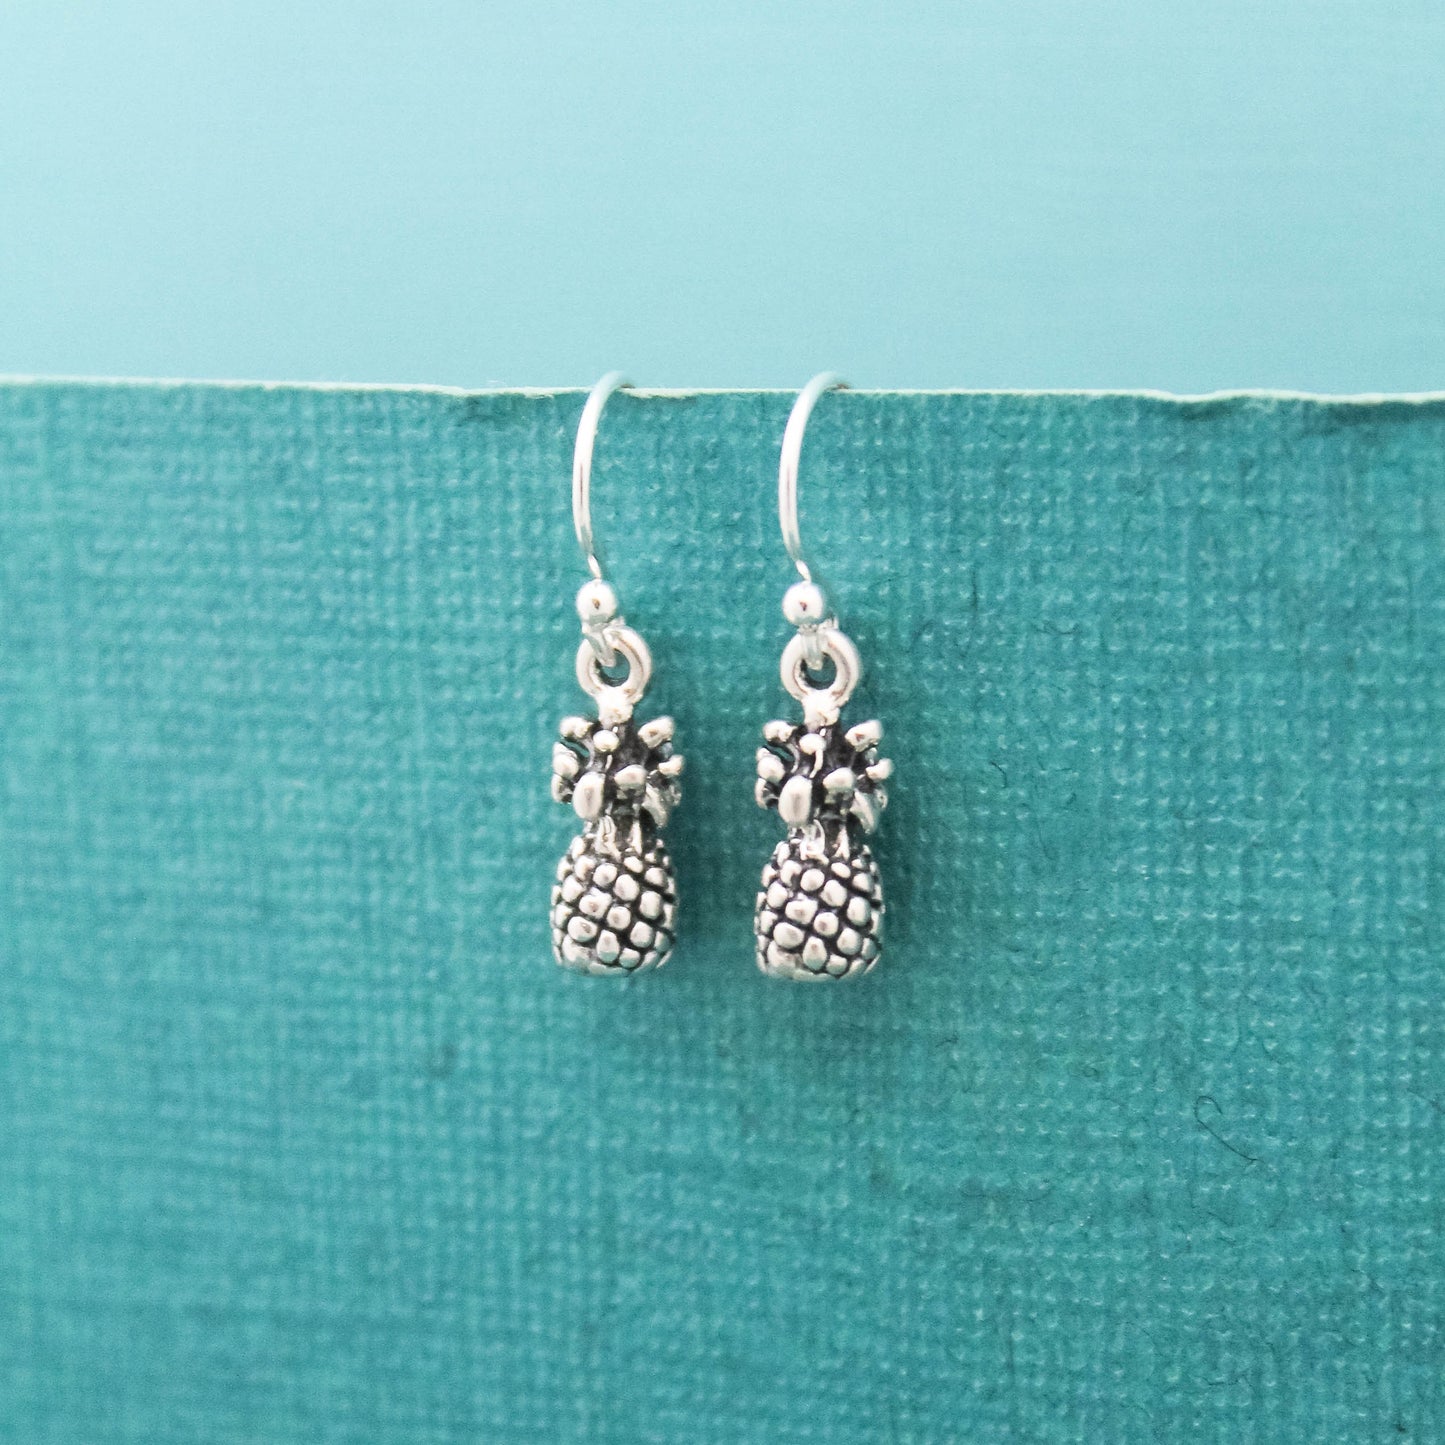 Cute Pineapple Earrings, Sterling Silver Pineapple Earrings, Hawaii Jewelry, Hawaii Earrings, Silver Pineapple Fruit Jewelry, Gifts for Her